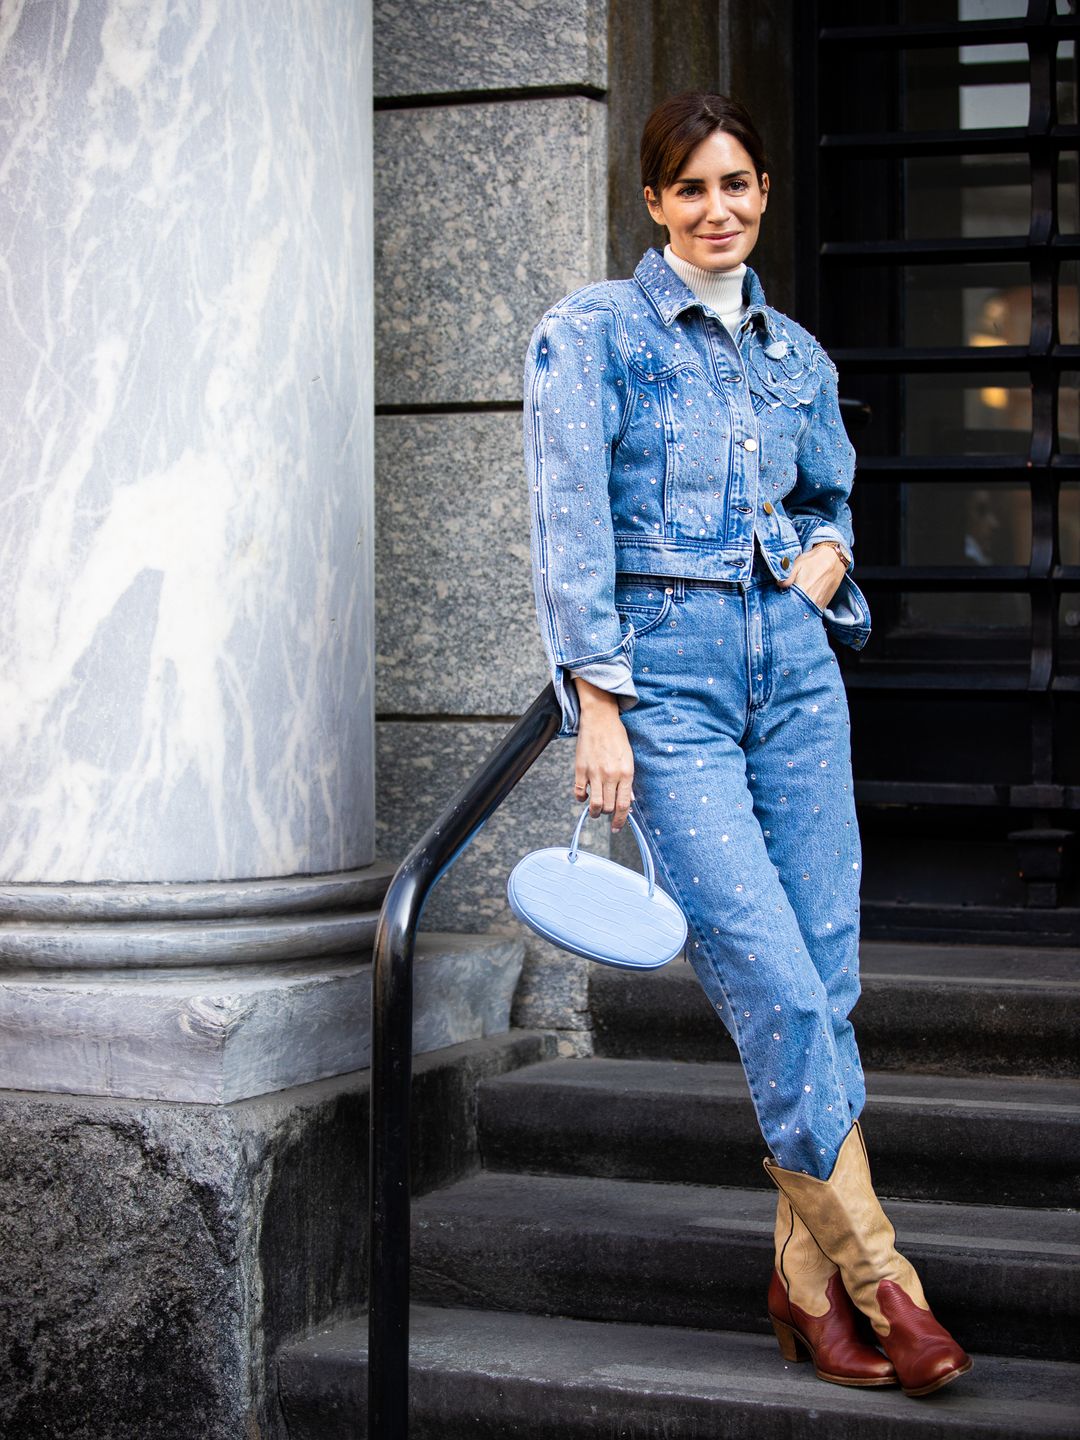 Gala Gonzalez rocks her pair with a studded denim jacket and matching jeans 